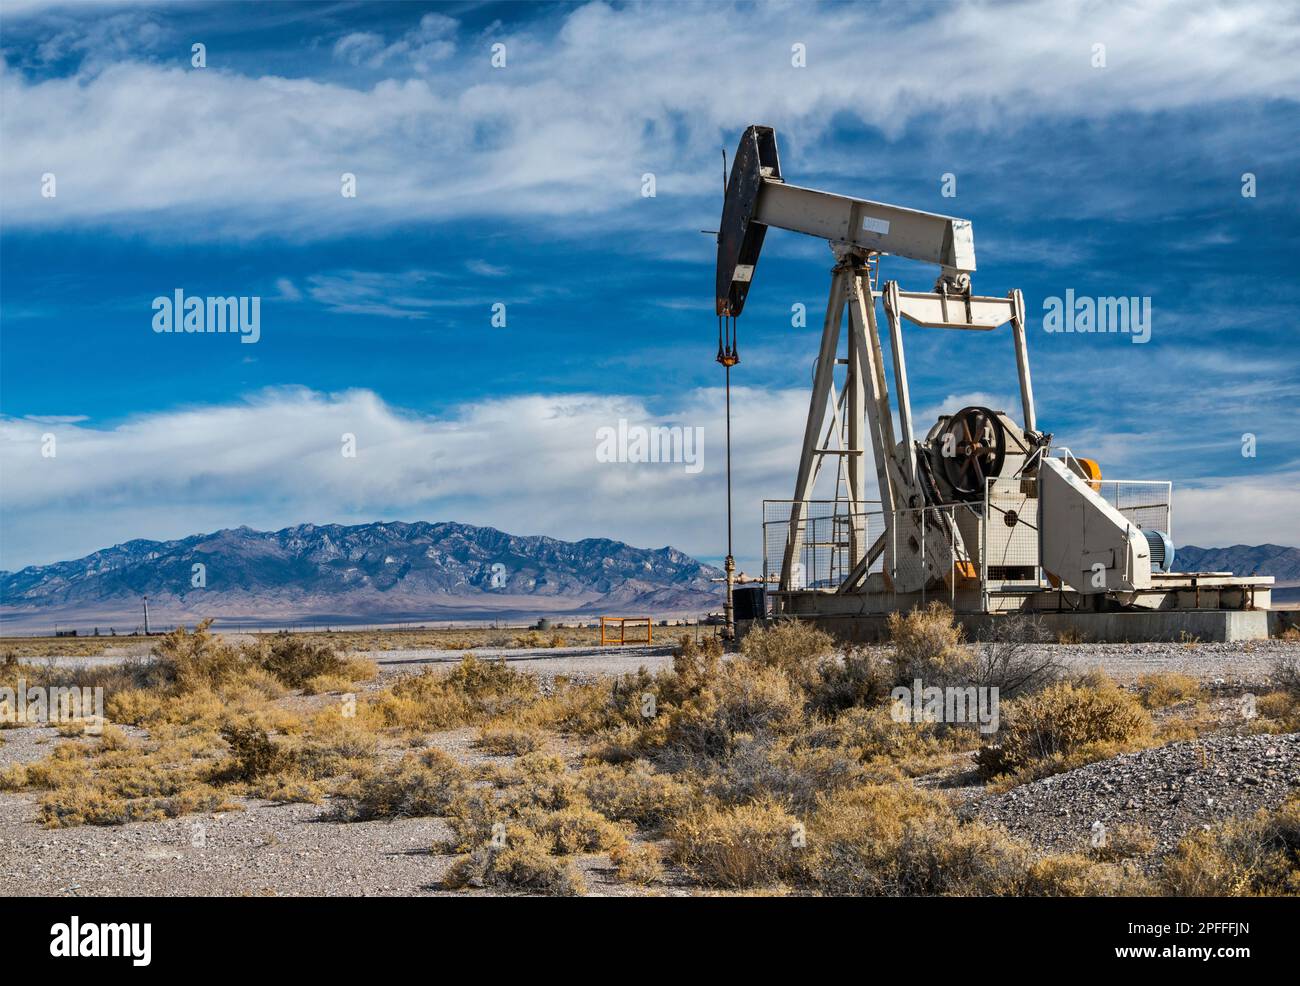 Pumpjack at oil well, Makoil Trap Spring Oil Field, Railroad Valley, Great Basin Desert, US-6 highway, 12 mi southwest of Currant, Nevada, USA Stock Photo